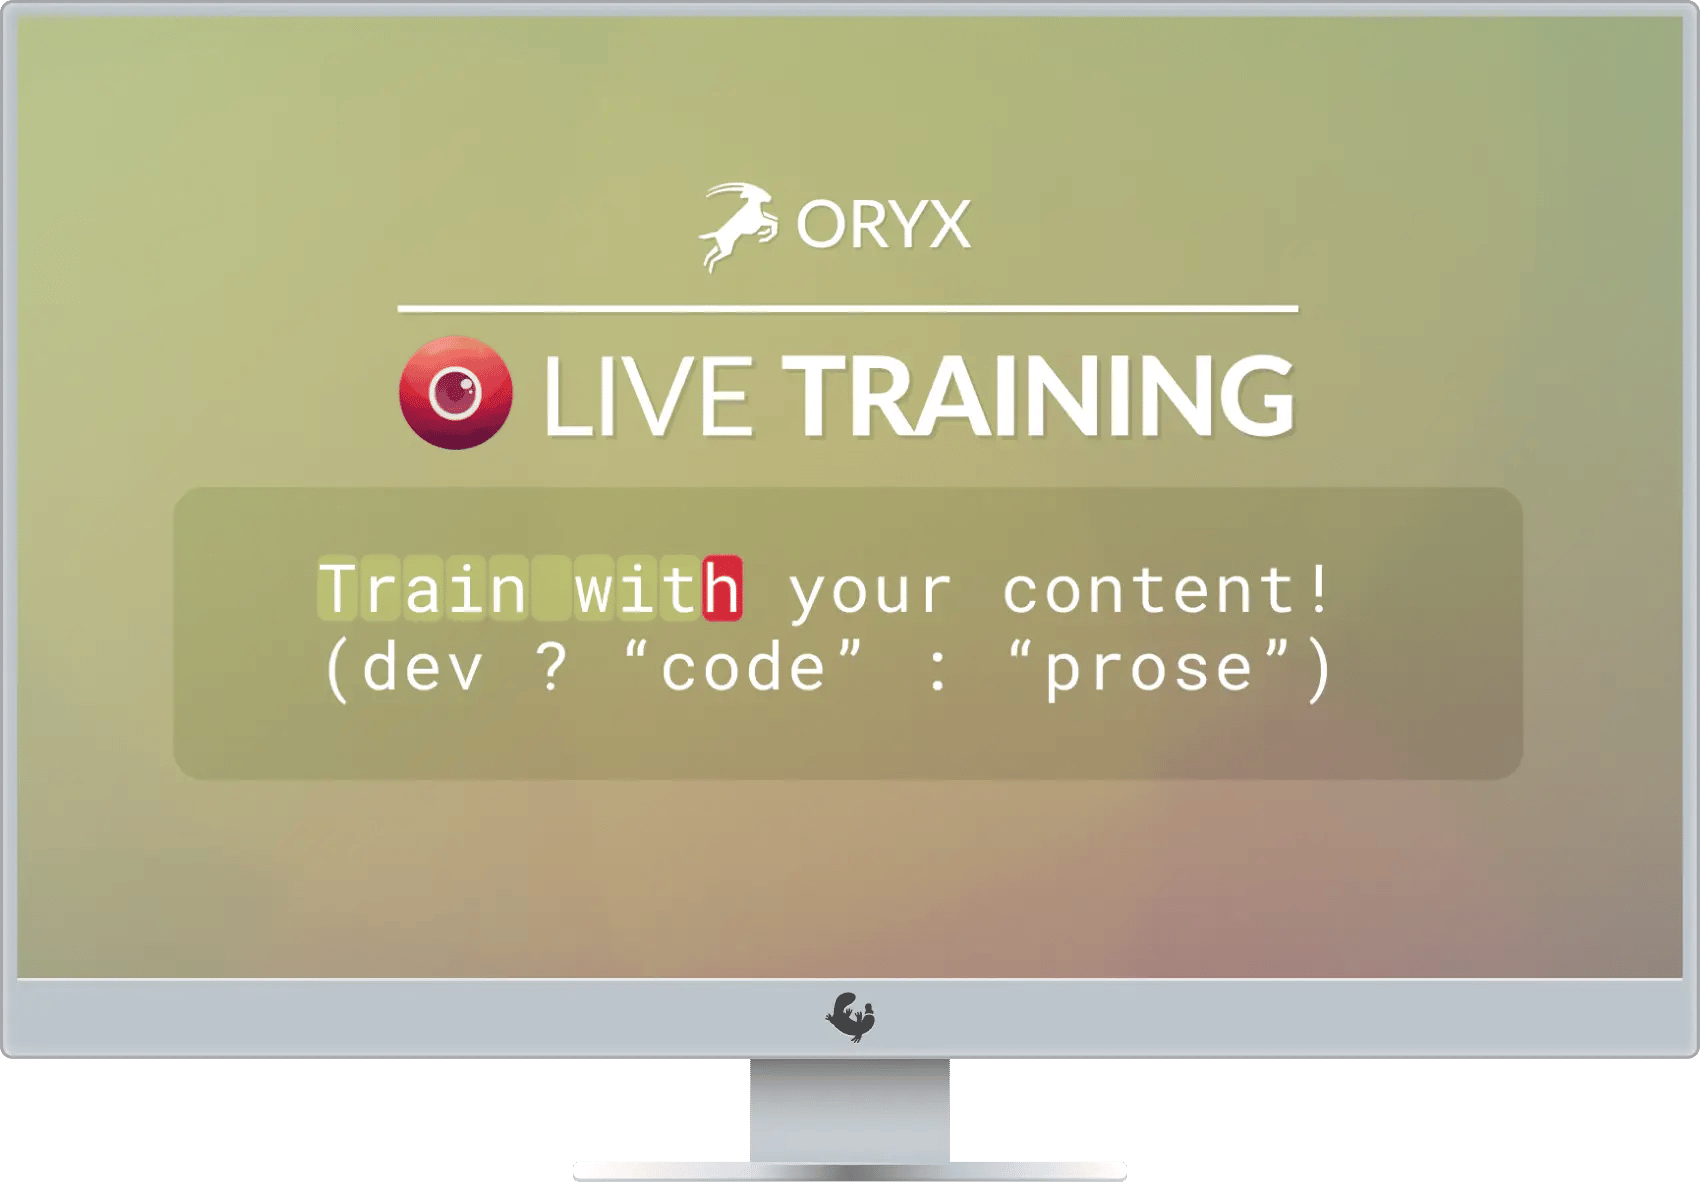 Monitor showing the live training page